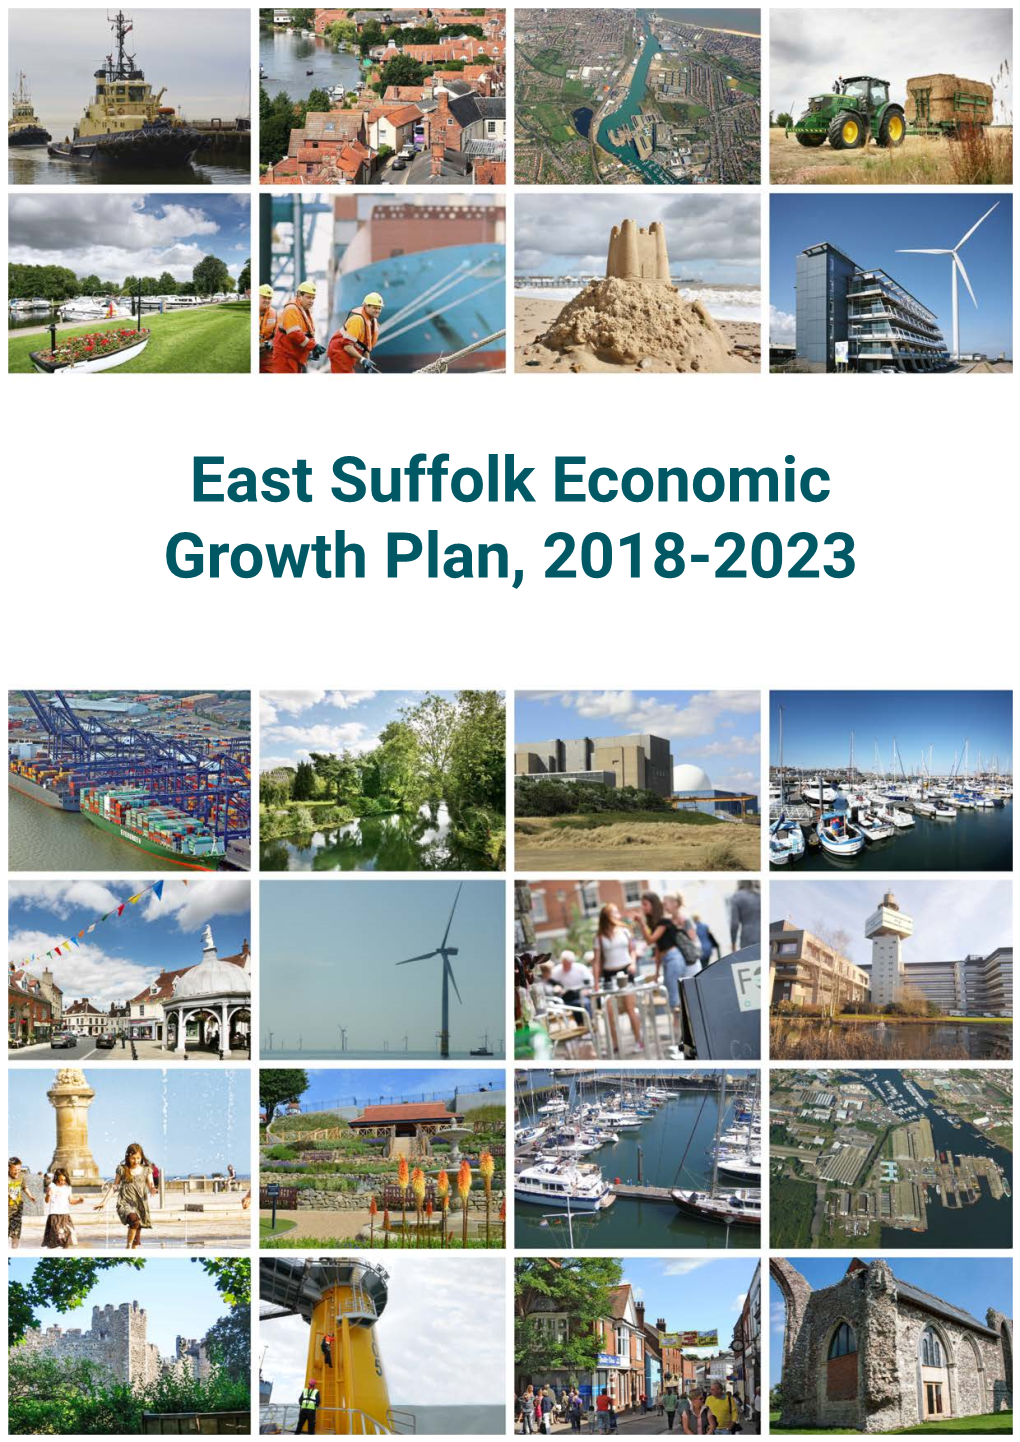 East Suffolk Economic Growth Plan, 2018-2023 Contents